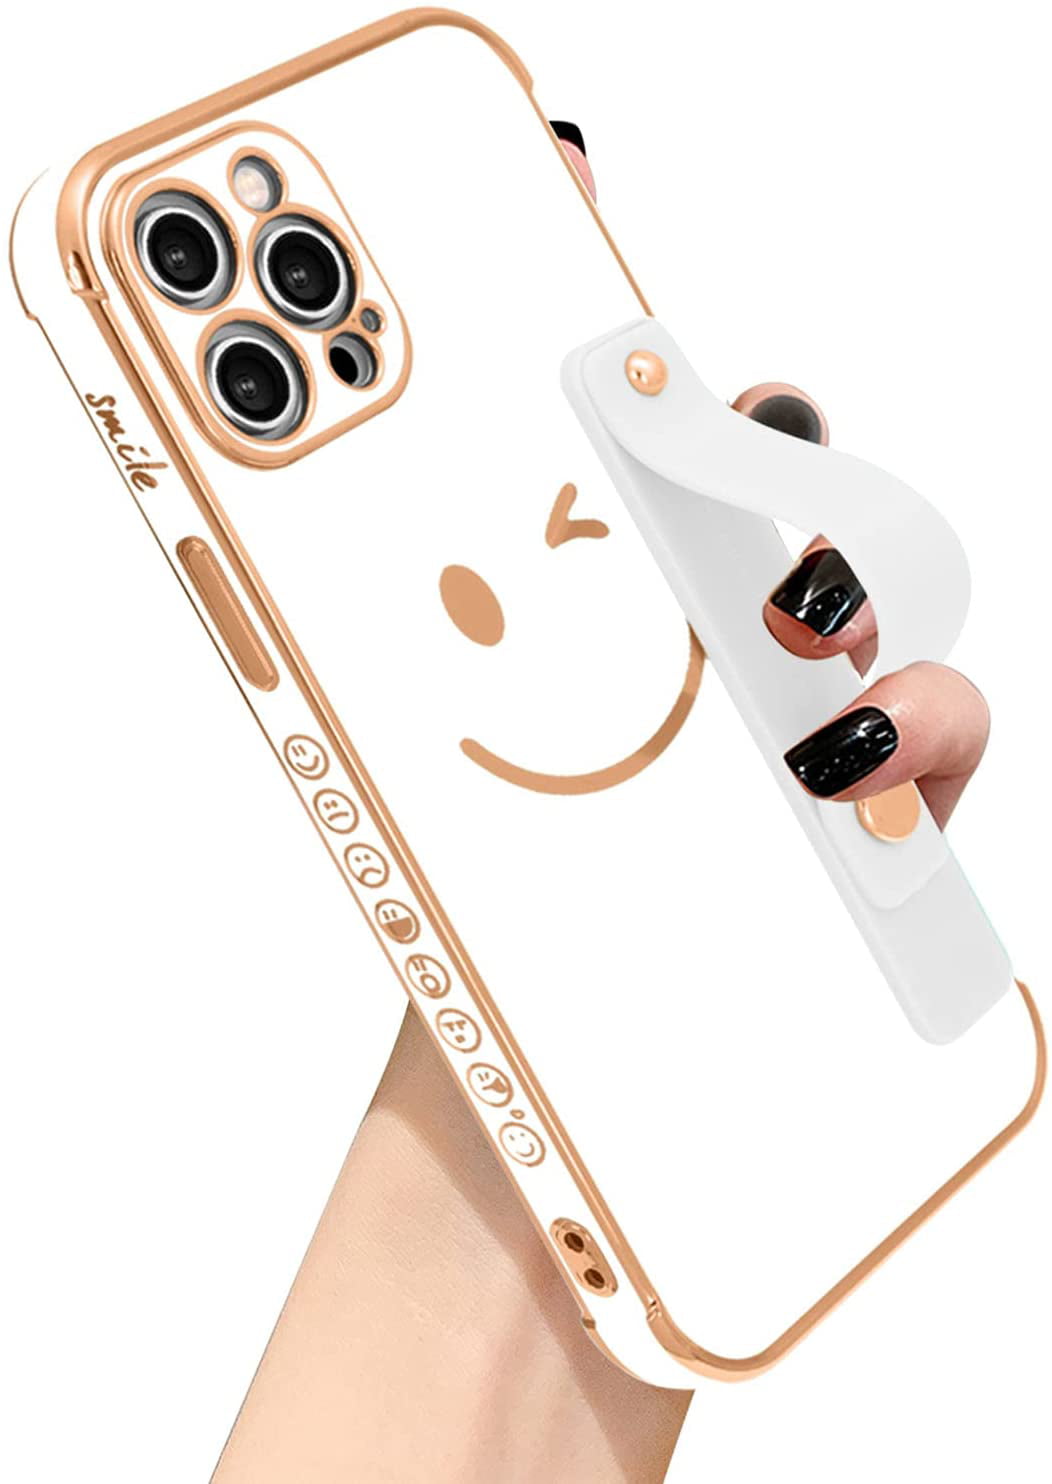 Girls Luxury Case with Stand Phone Cover Skin For iPhone 12 Pro